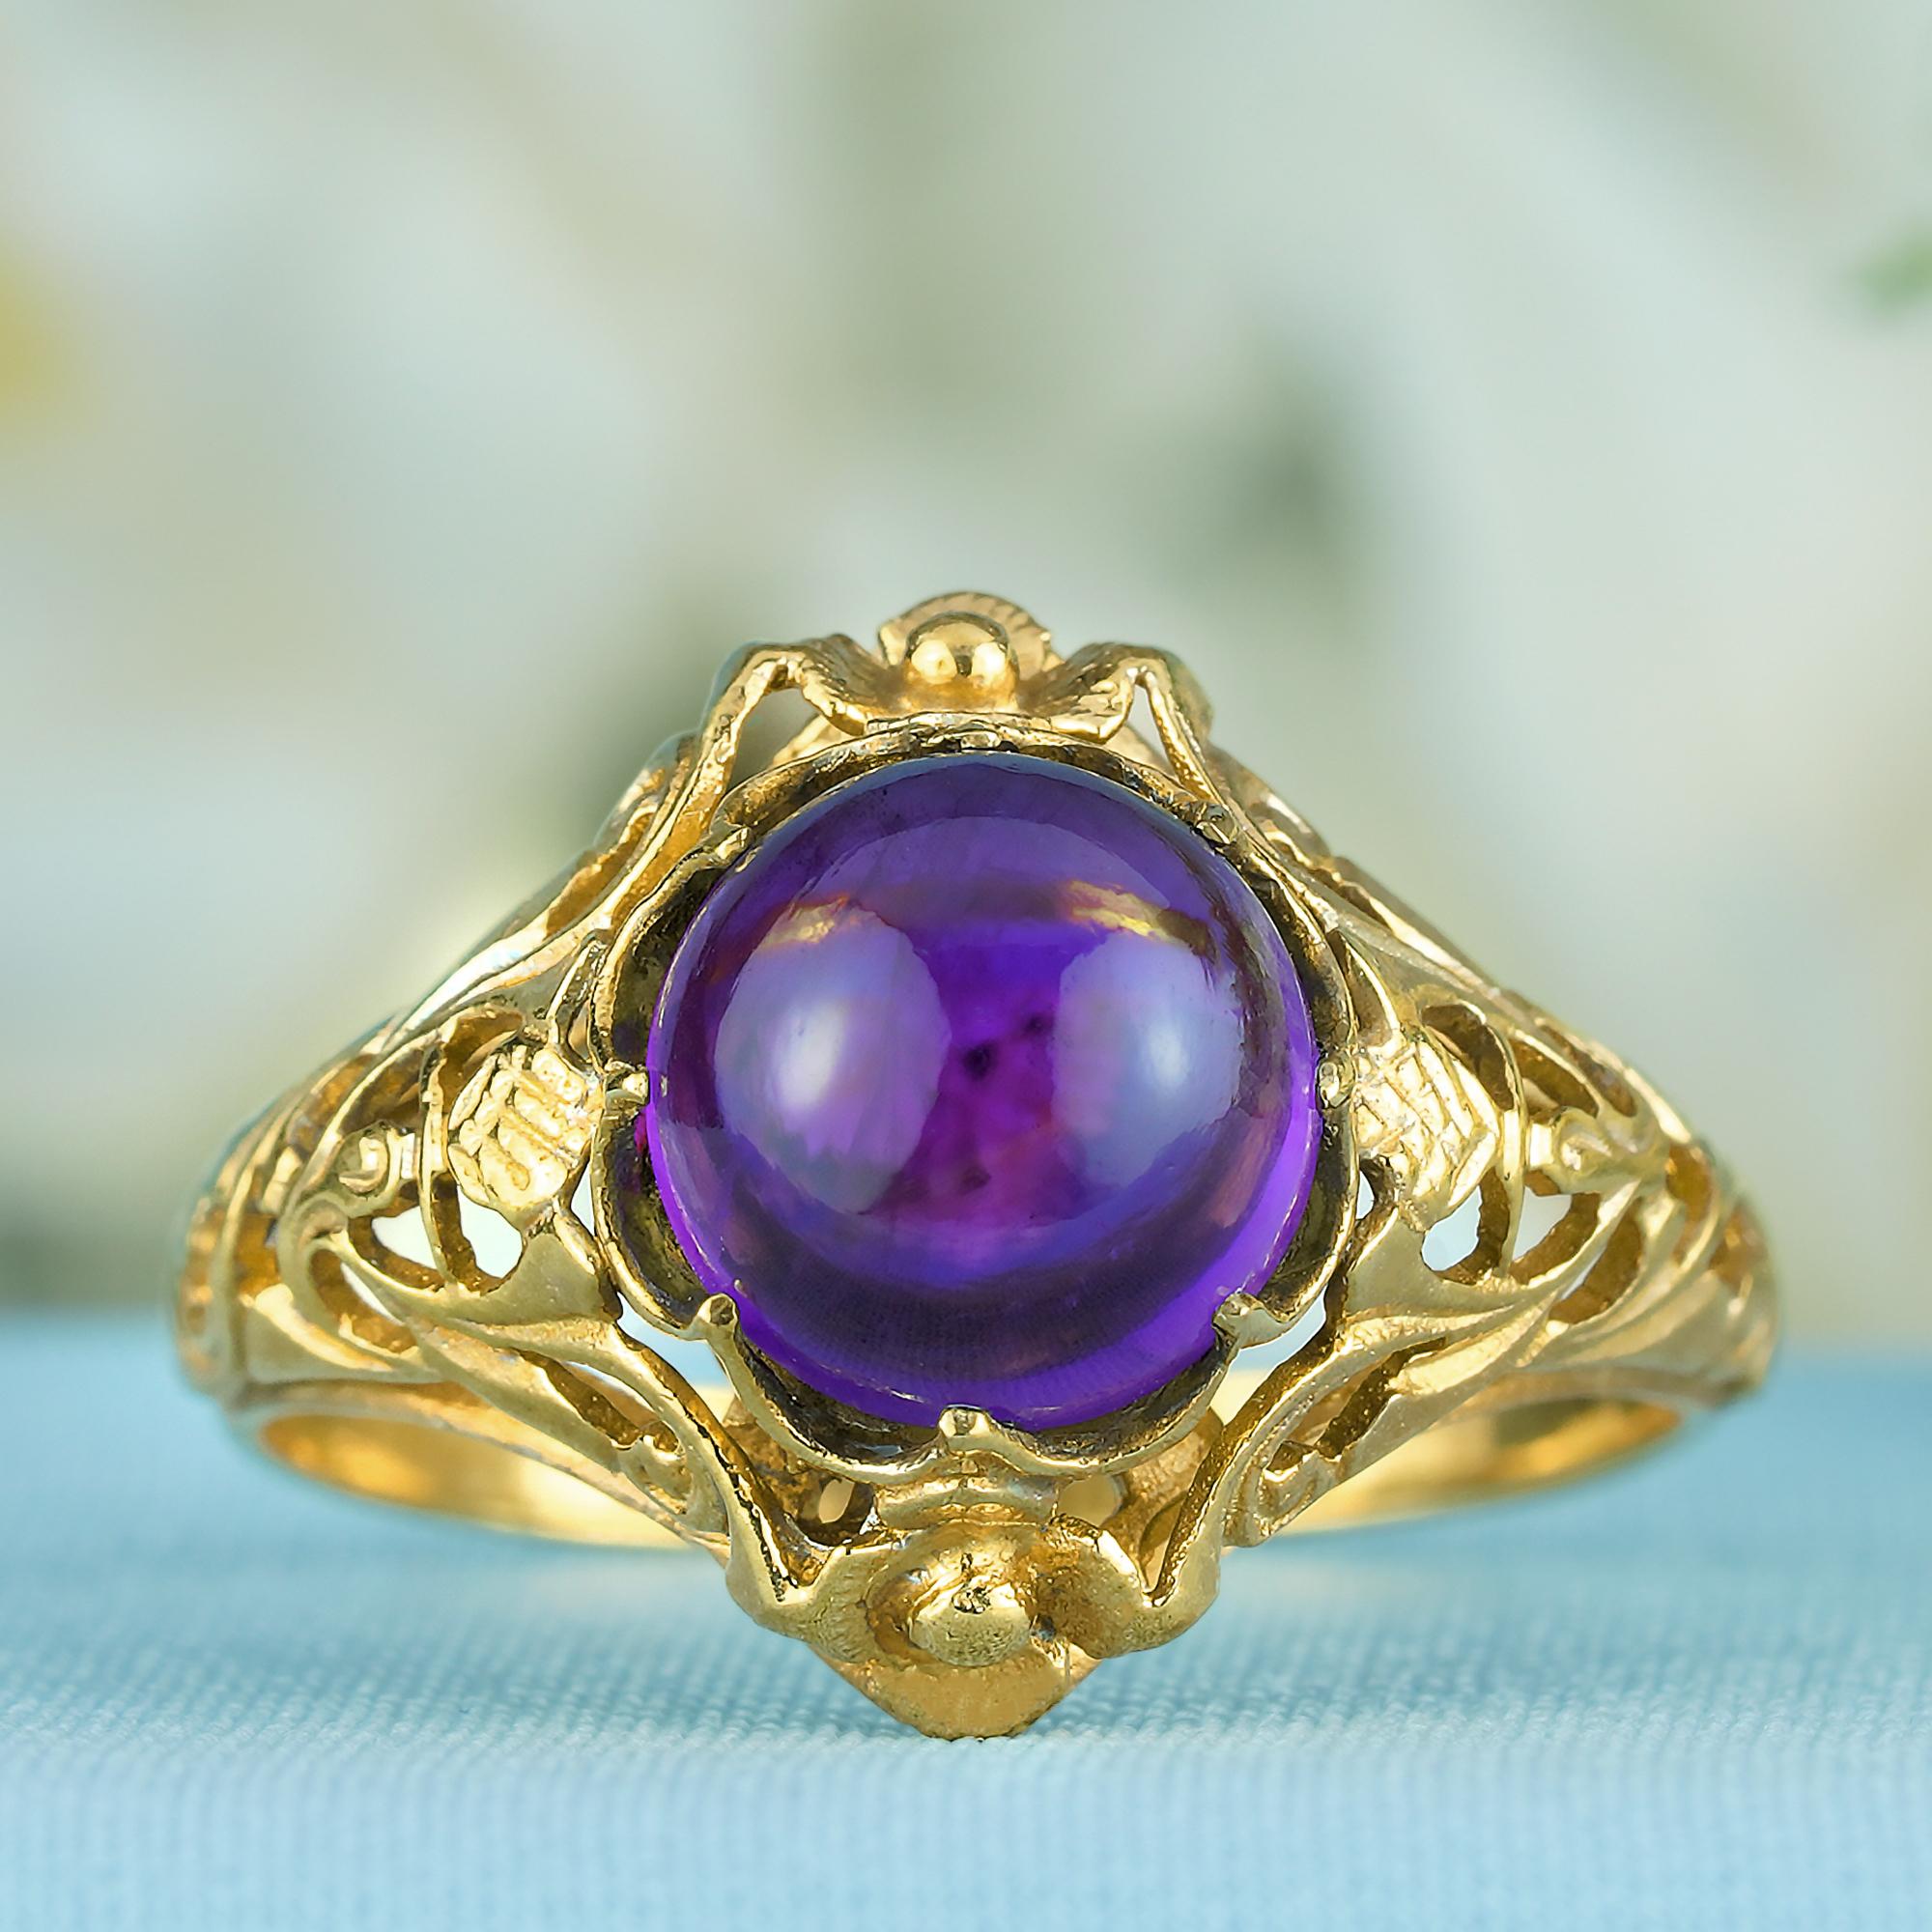 For Sale:  Natural Cabochon Amethyst Vintage Style Filigree Ring in Solid 9K Yellow Gold 3